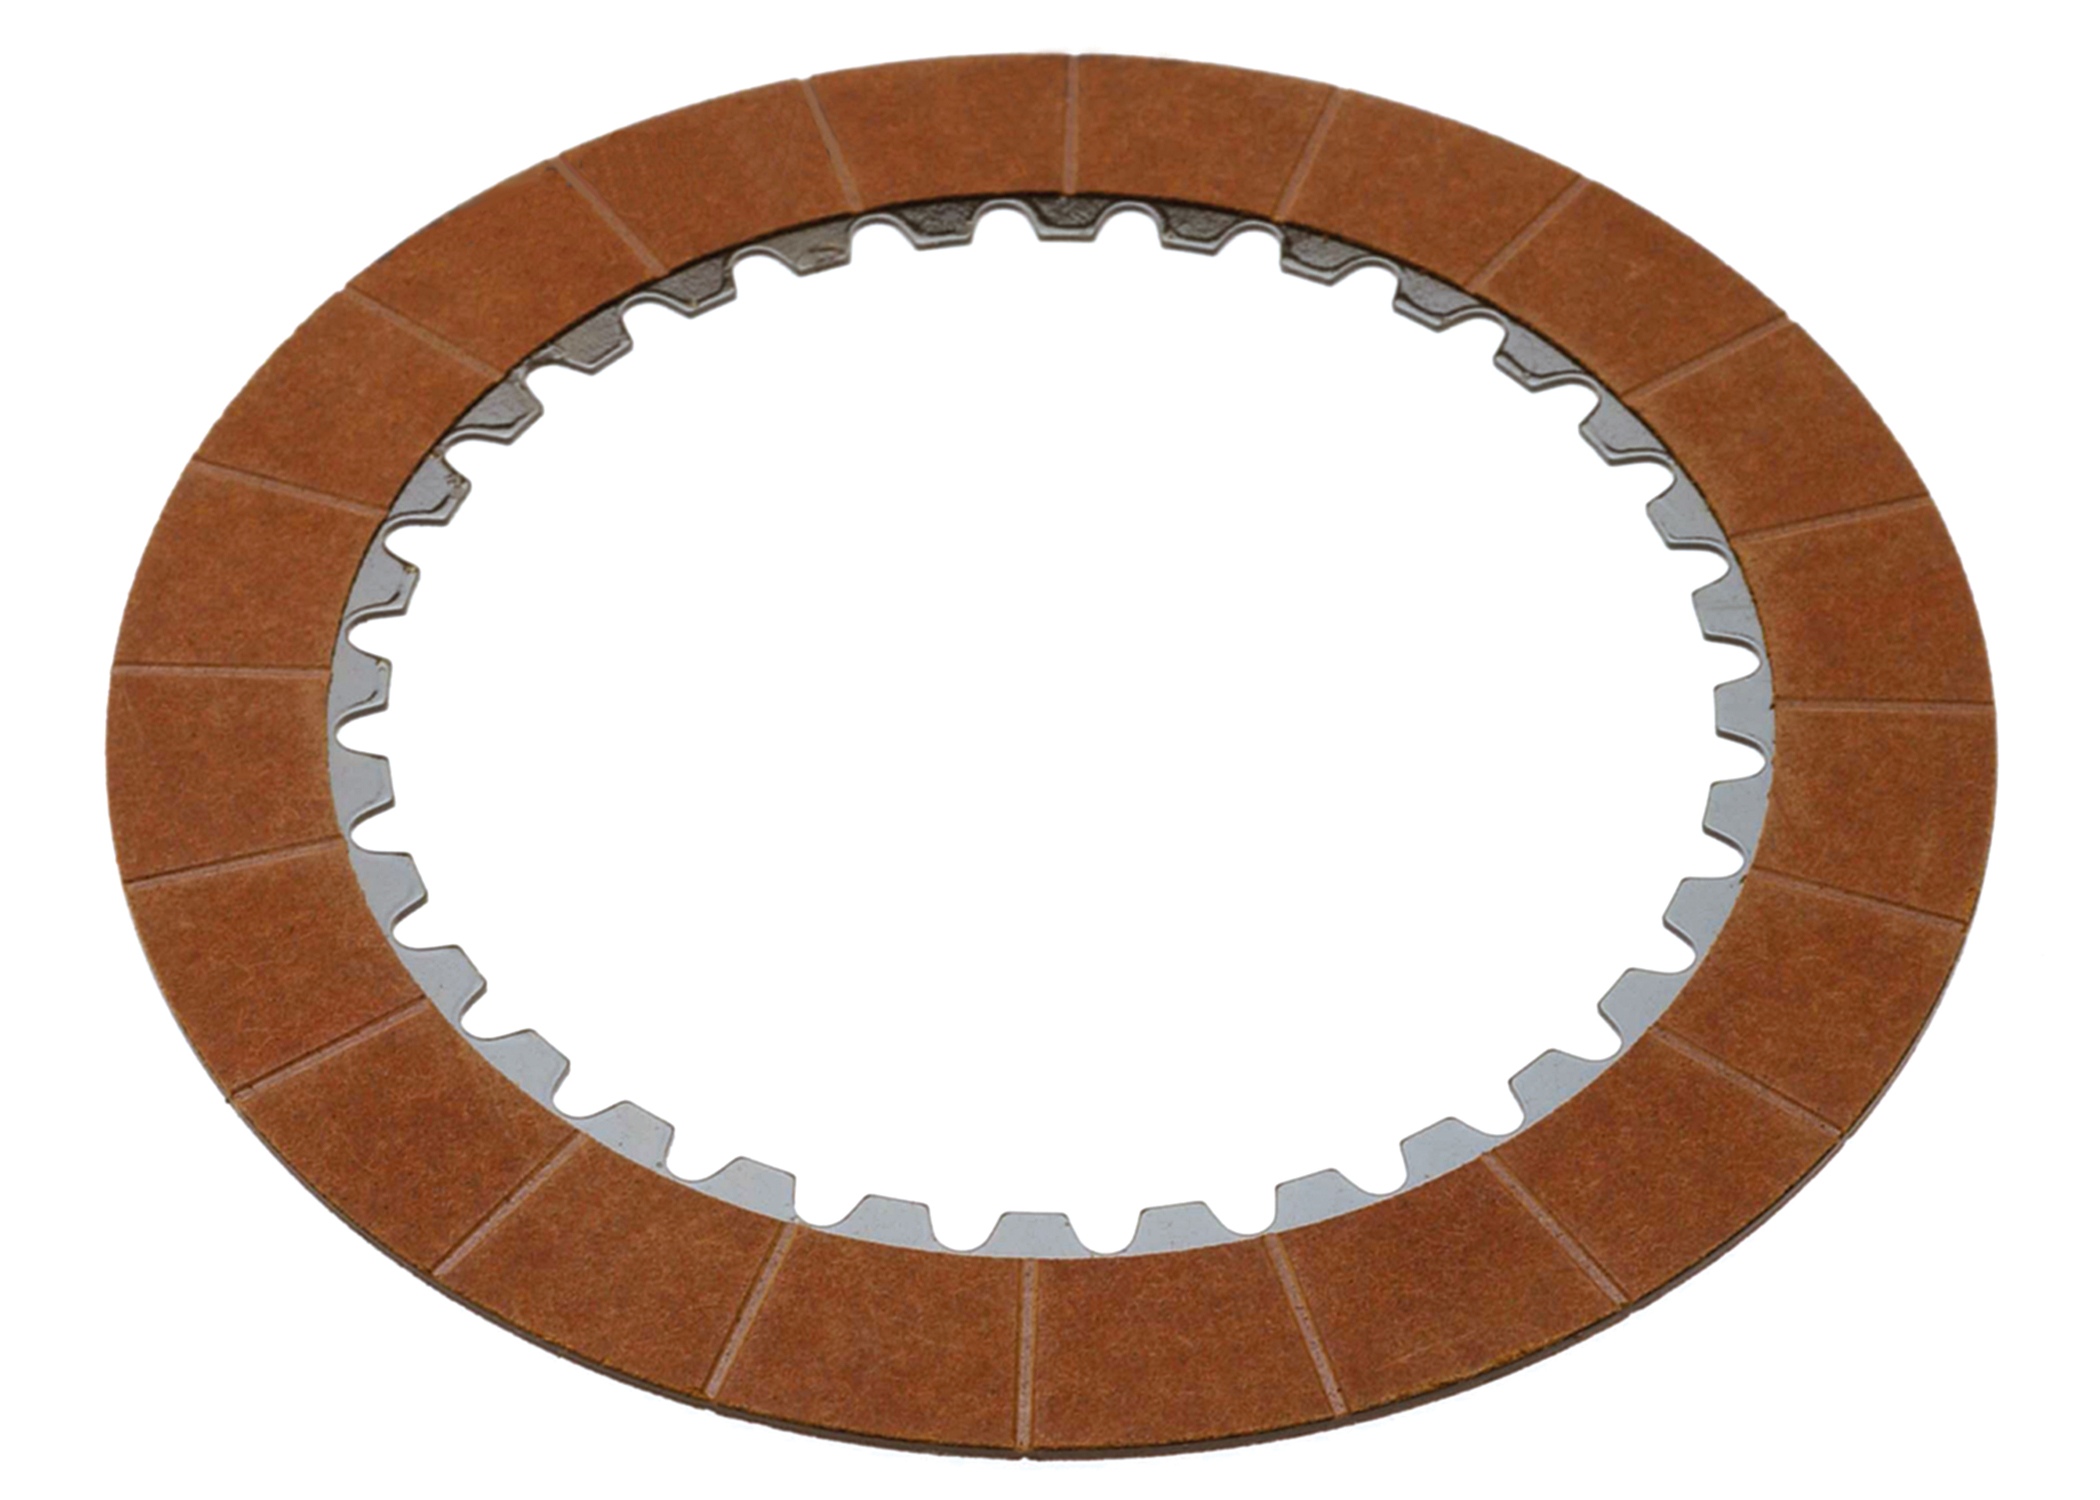 GM GENUINE PARTS - Transmission Clutch Friction Plate (Input) - GMP 24202333